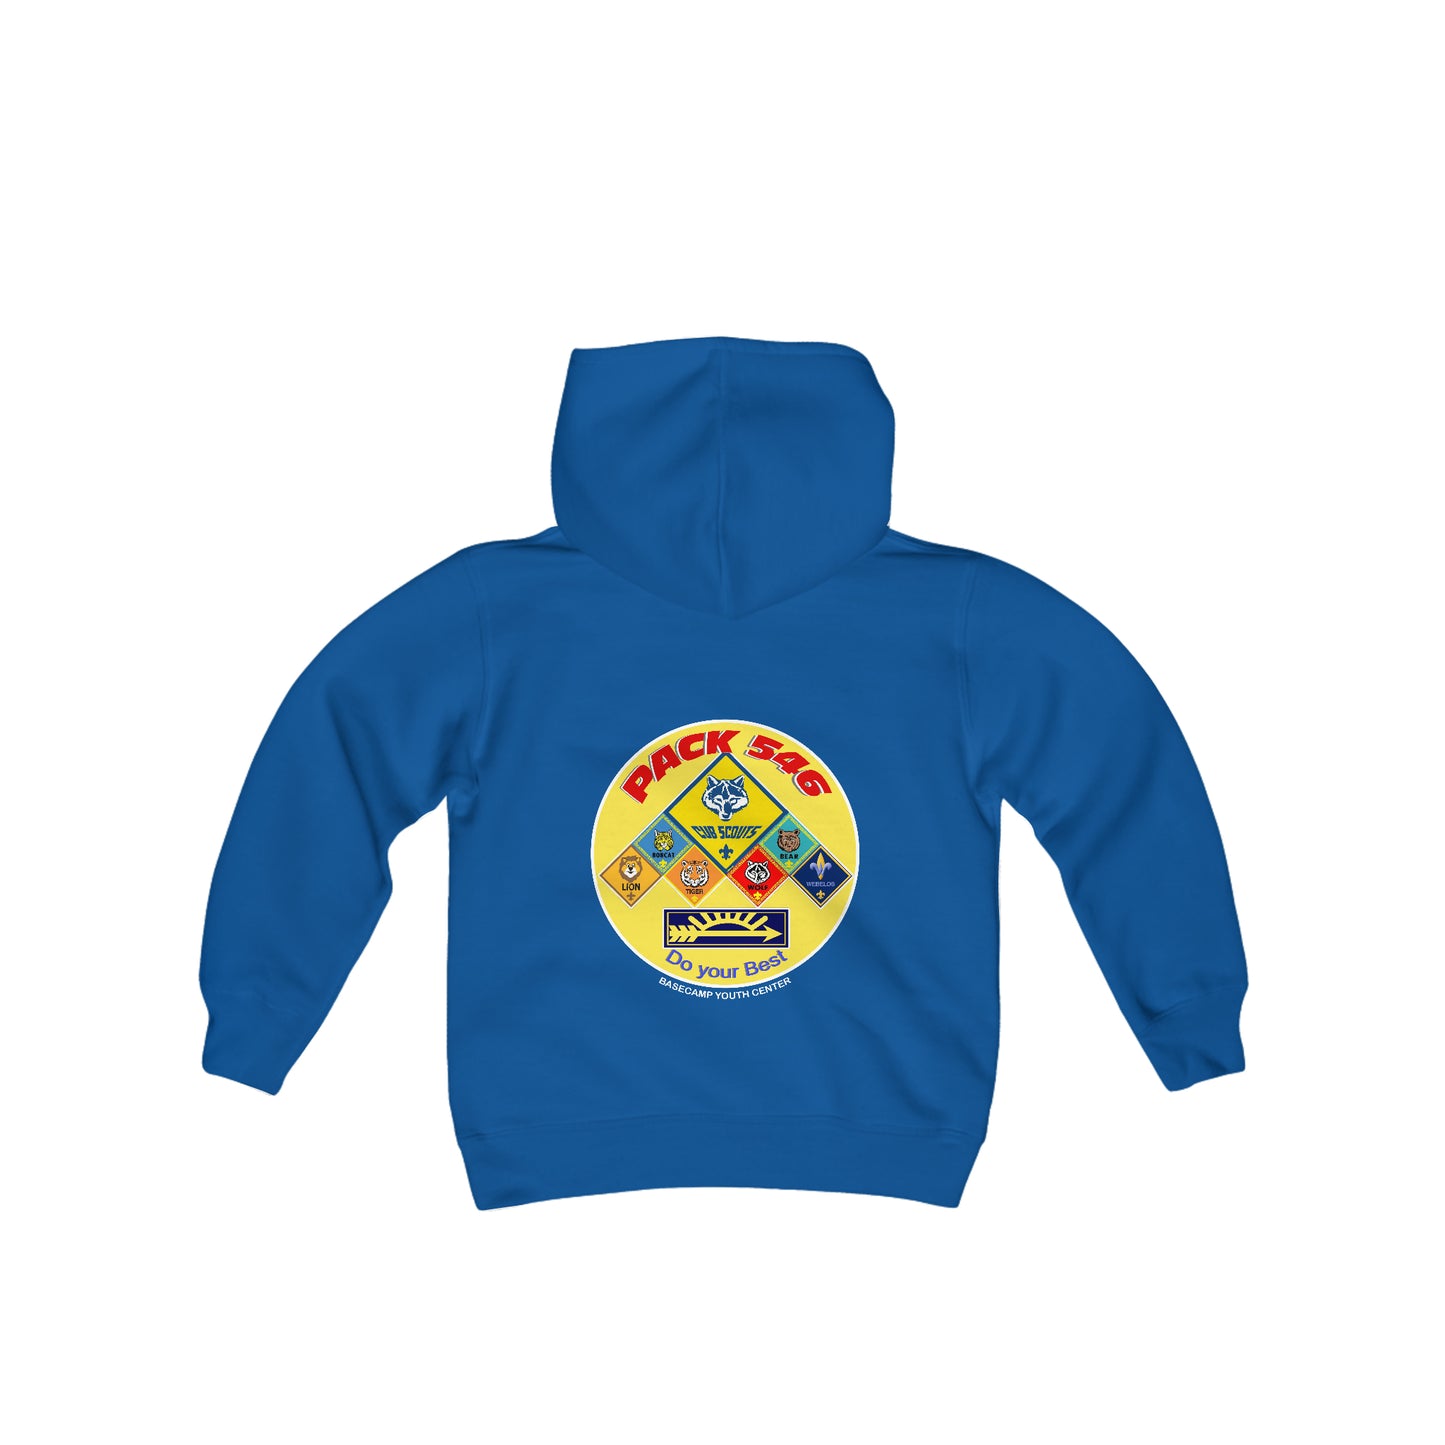 Pack 546 - Youth Cotton Hooded Sweatshirt